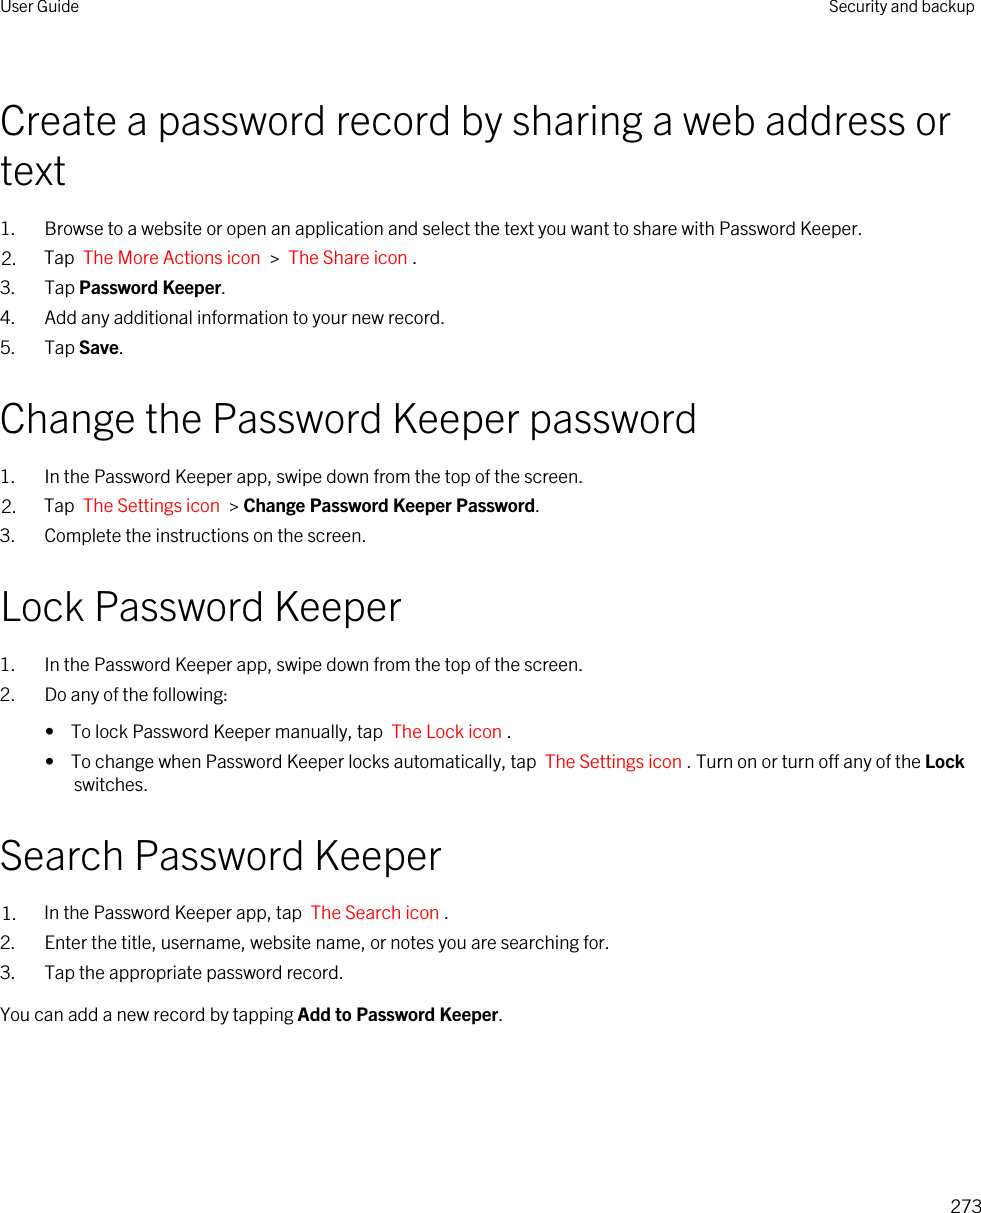 Create a password record by sharing a web address or text1. Browse to a website or open an application and select the text you want to share with Password Keeper.2. Tap  The More Actions icon  &gt;  The Share icon .3. Tap Password Keeper.4. Add any additional information to your new record.5. Tap Save.Change the Password Keeper password1. In the Password Keeper app, swipe down from the top of the screen.2. Tap  The Settings icon  &gt; Change Password Keeper Password.3. Complete the instructions on the screen.Lock Password Keeper1. In the Password Keeper app, swipe down from the top of the screen.2. Do any of the following:•  To lock Password Keeper manually, tap  The Lock icon .•  To change when Password Keeper locks automatically, tap  The Settings icon . Turn on or turn off any of the Lock switches.Search Password Keeper1. In the Password Keeper app, tap  The Search icon .2. Enter the title, username, website name, or notes you are searching for.3. Tap the appropriate password record.You can add a new record by tapping Add to Password Keeper.User Guide Security and backup273